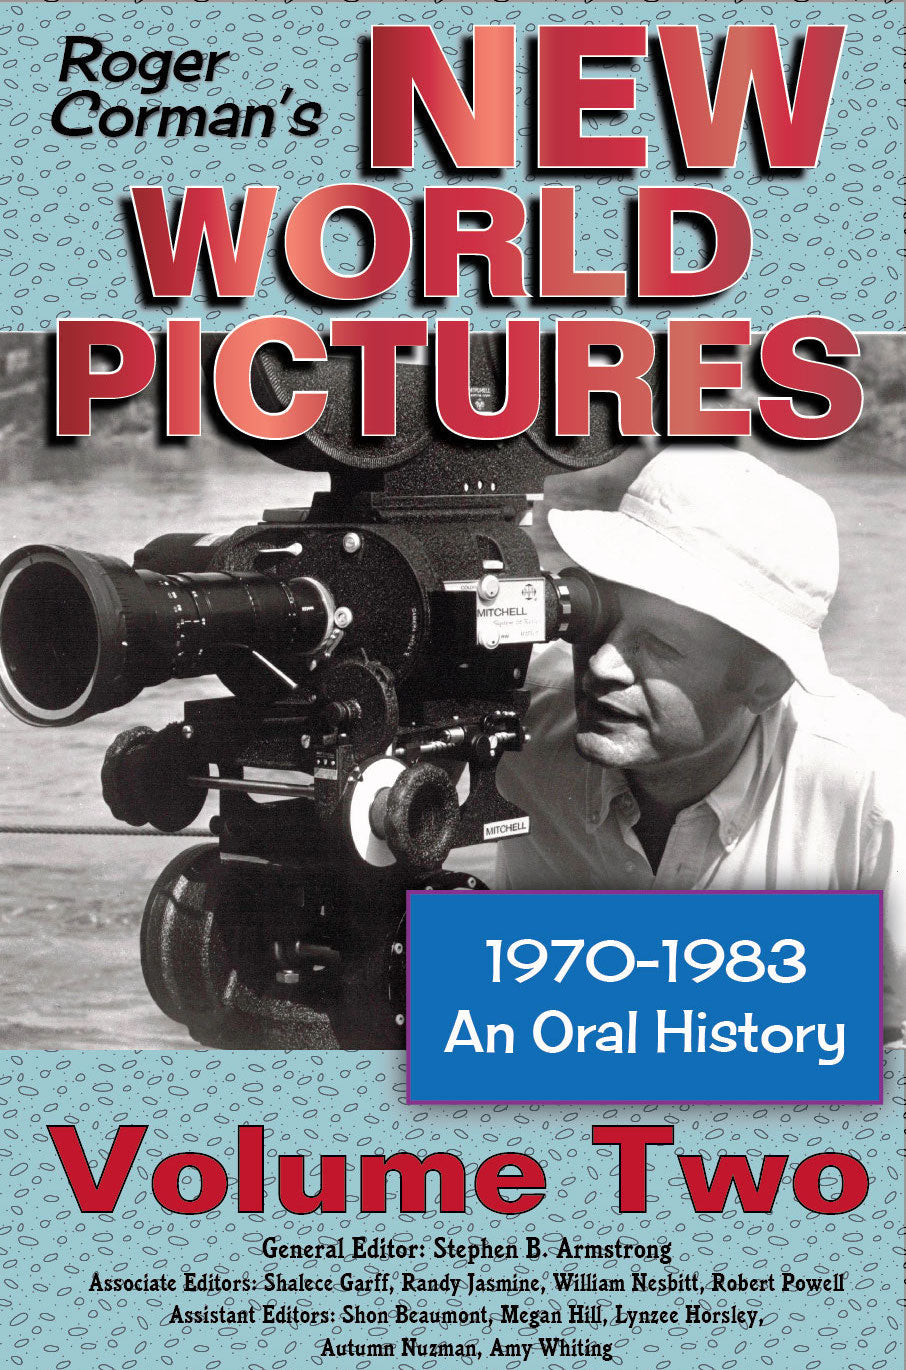 Roger Corman’s New World Pictures, 1970-1983: An Oral History, Vol. 2 (paperback)